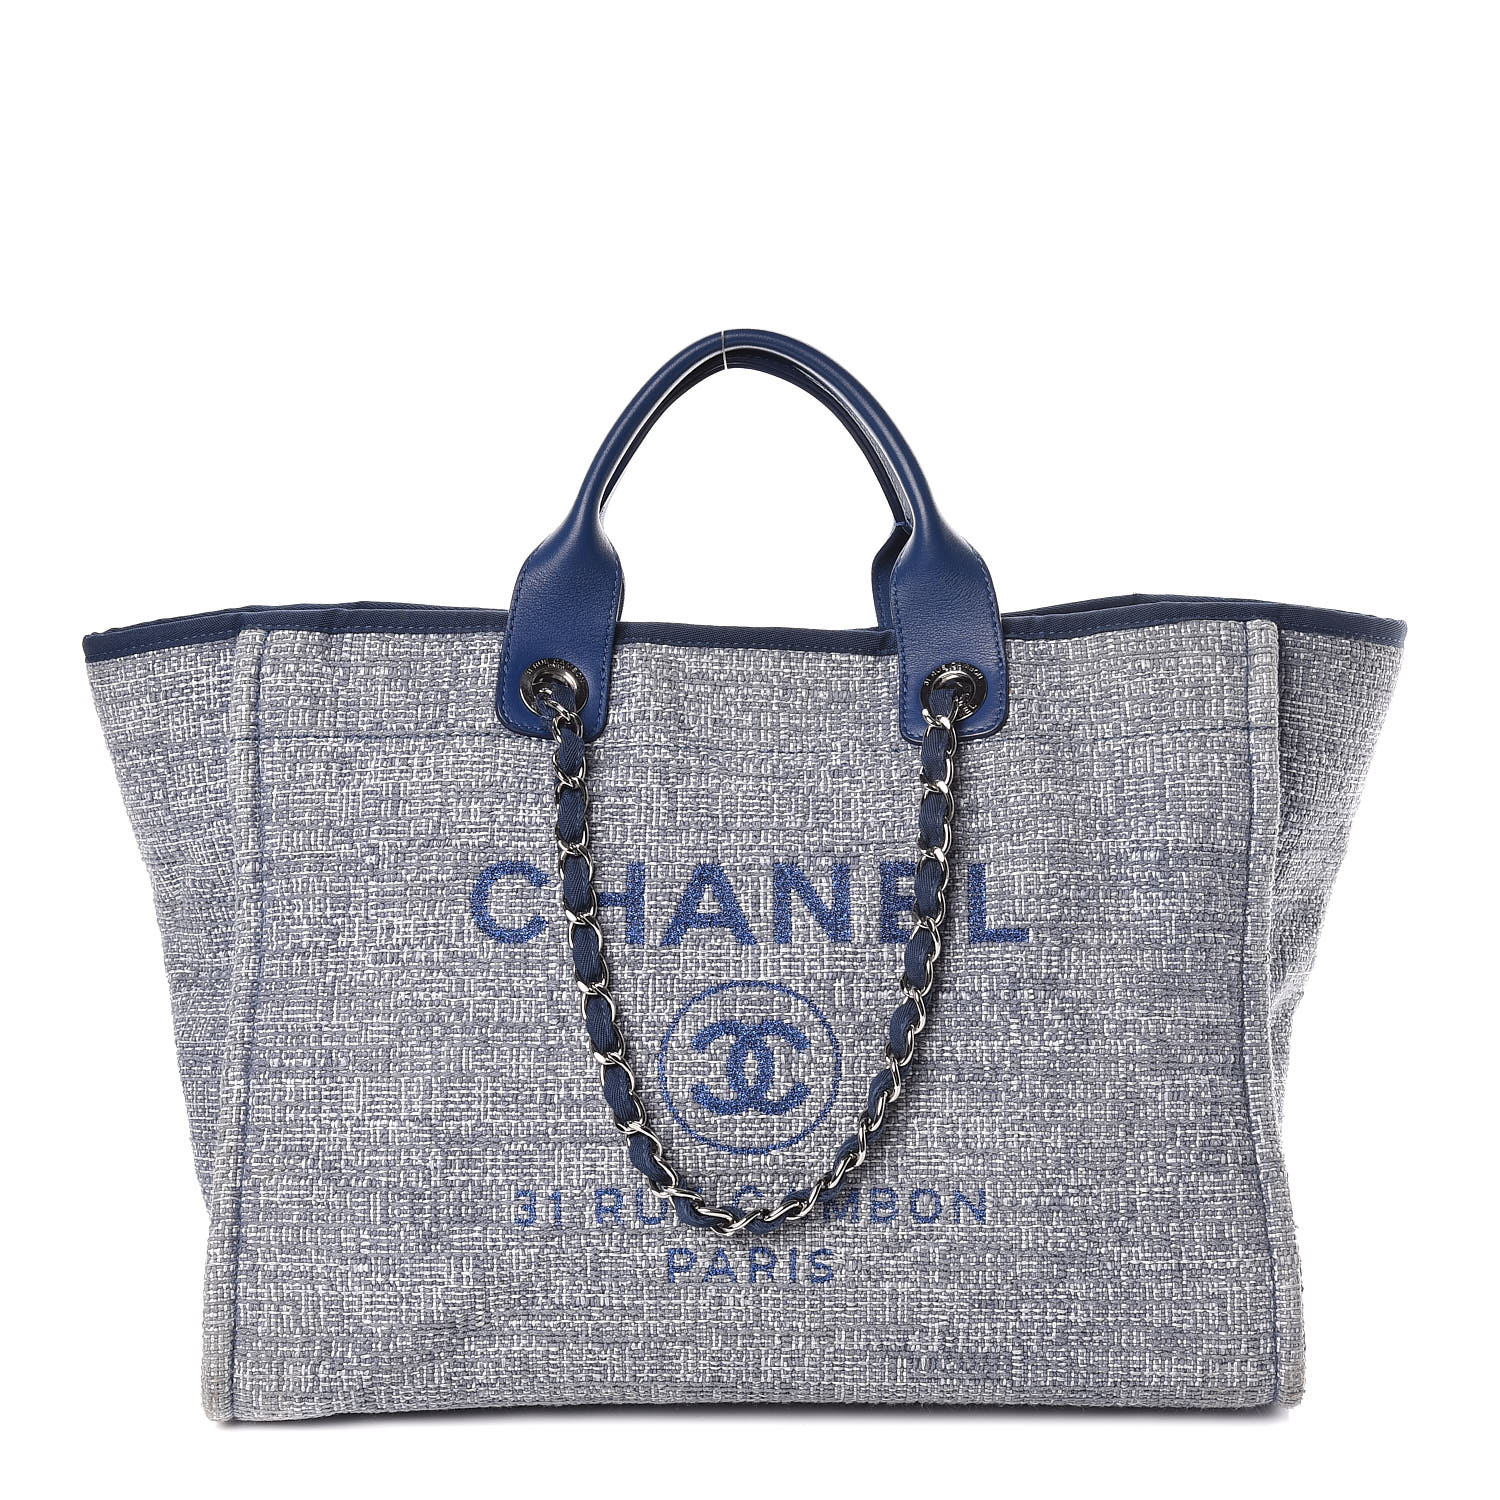 CHANEL Canvas Large Deauville Tote Blue 452534